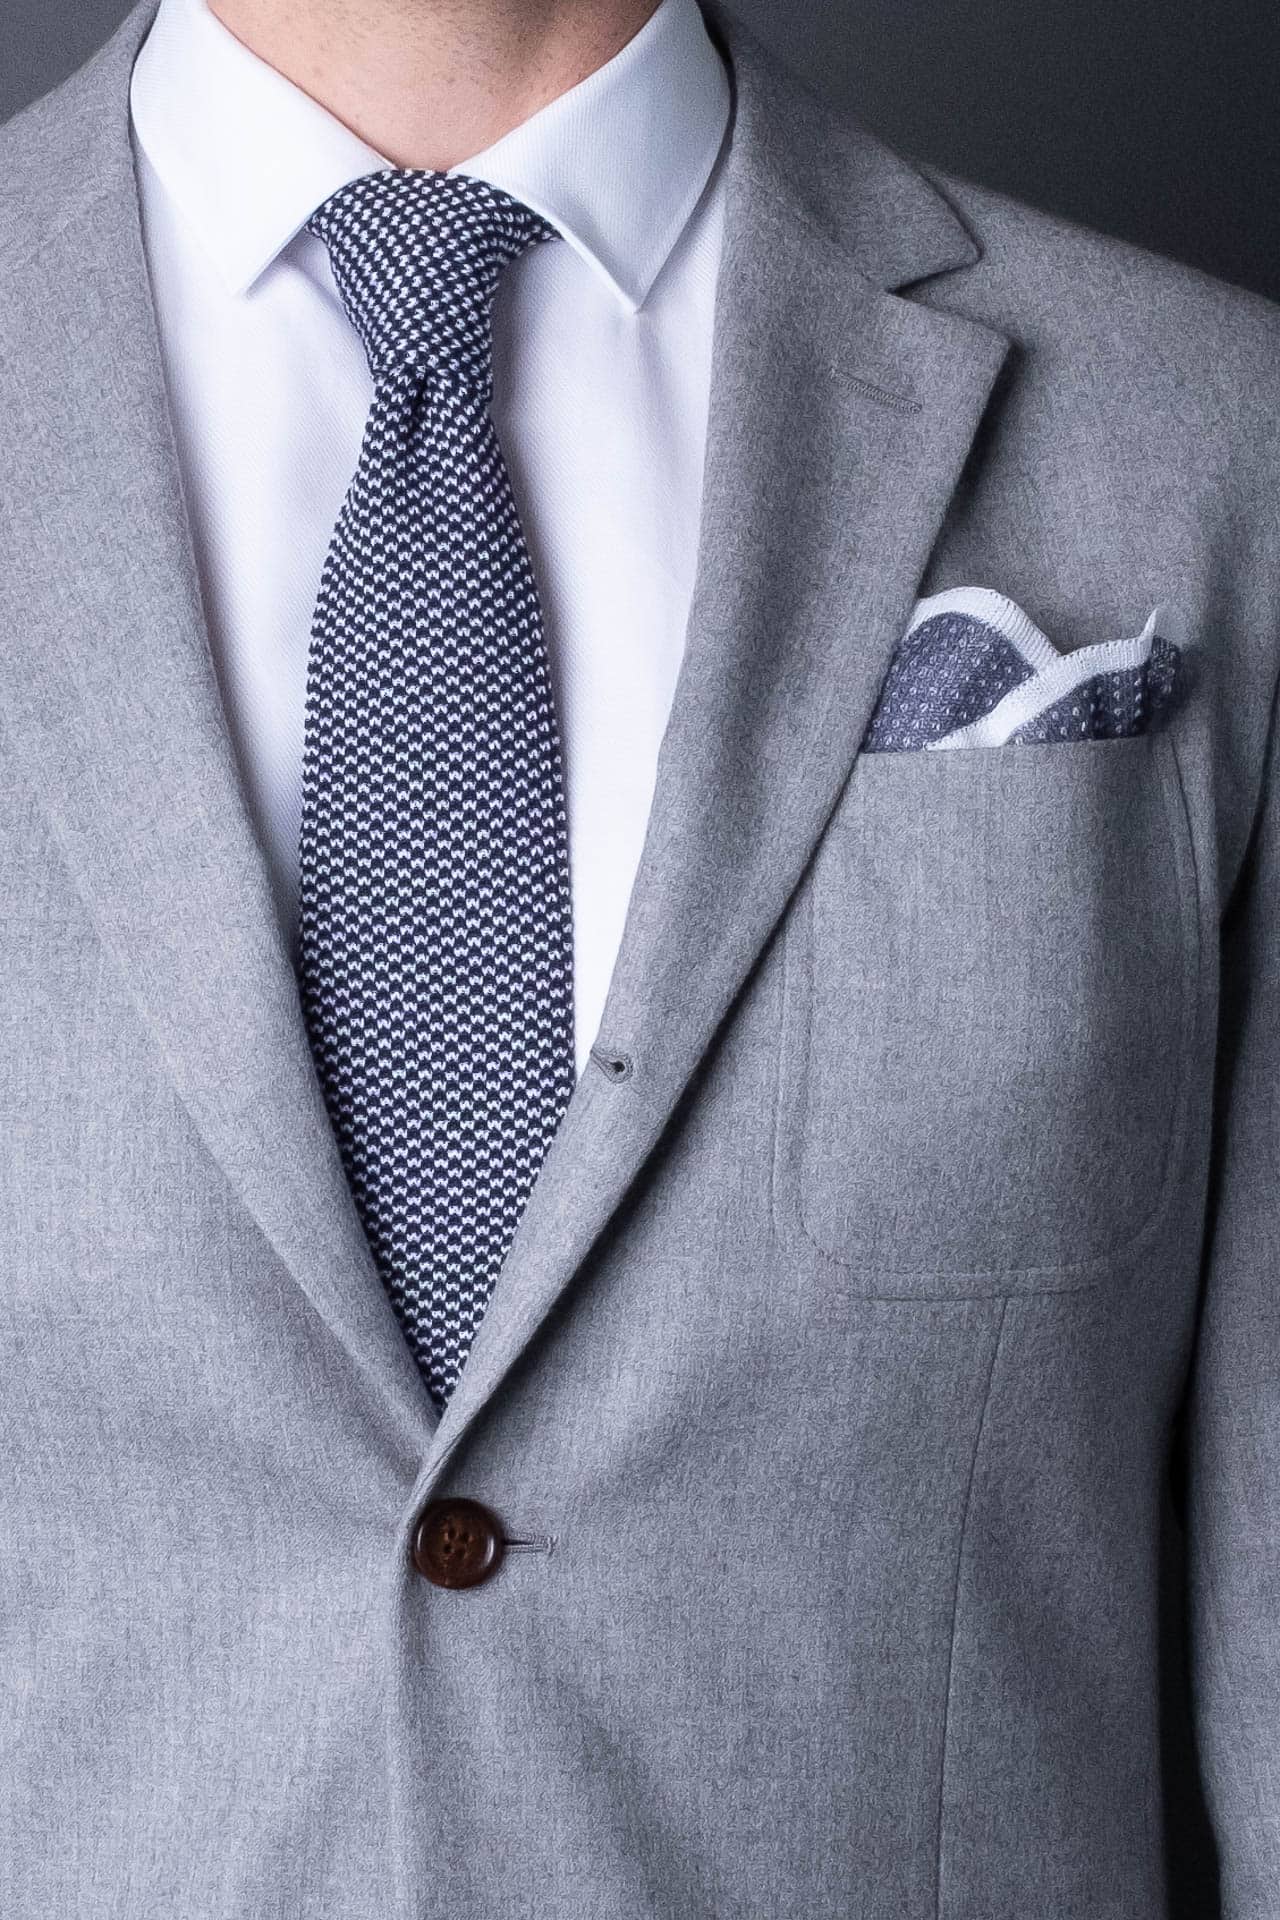 cotton-knitted-tie-with-square-tip-blue-and-white-made-in-italy-combo-matching-pocket-square